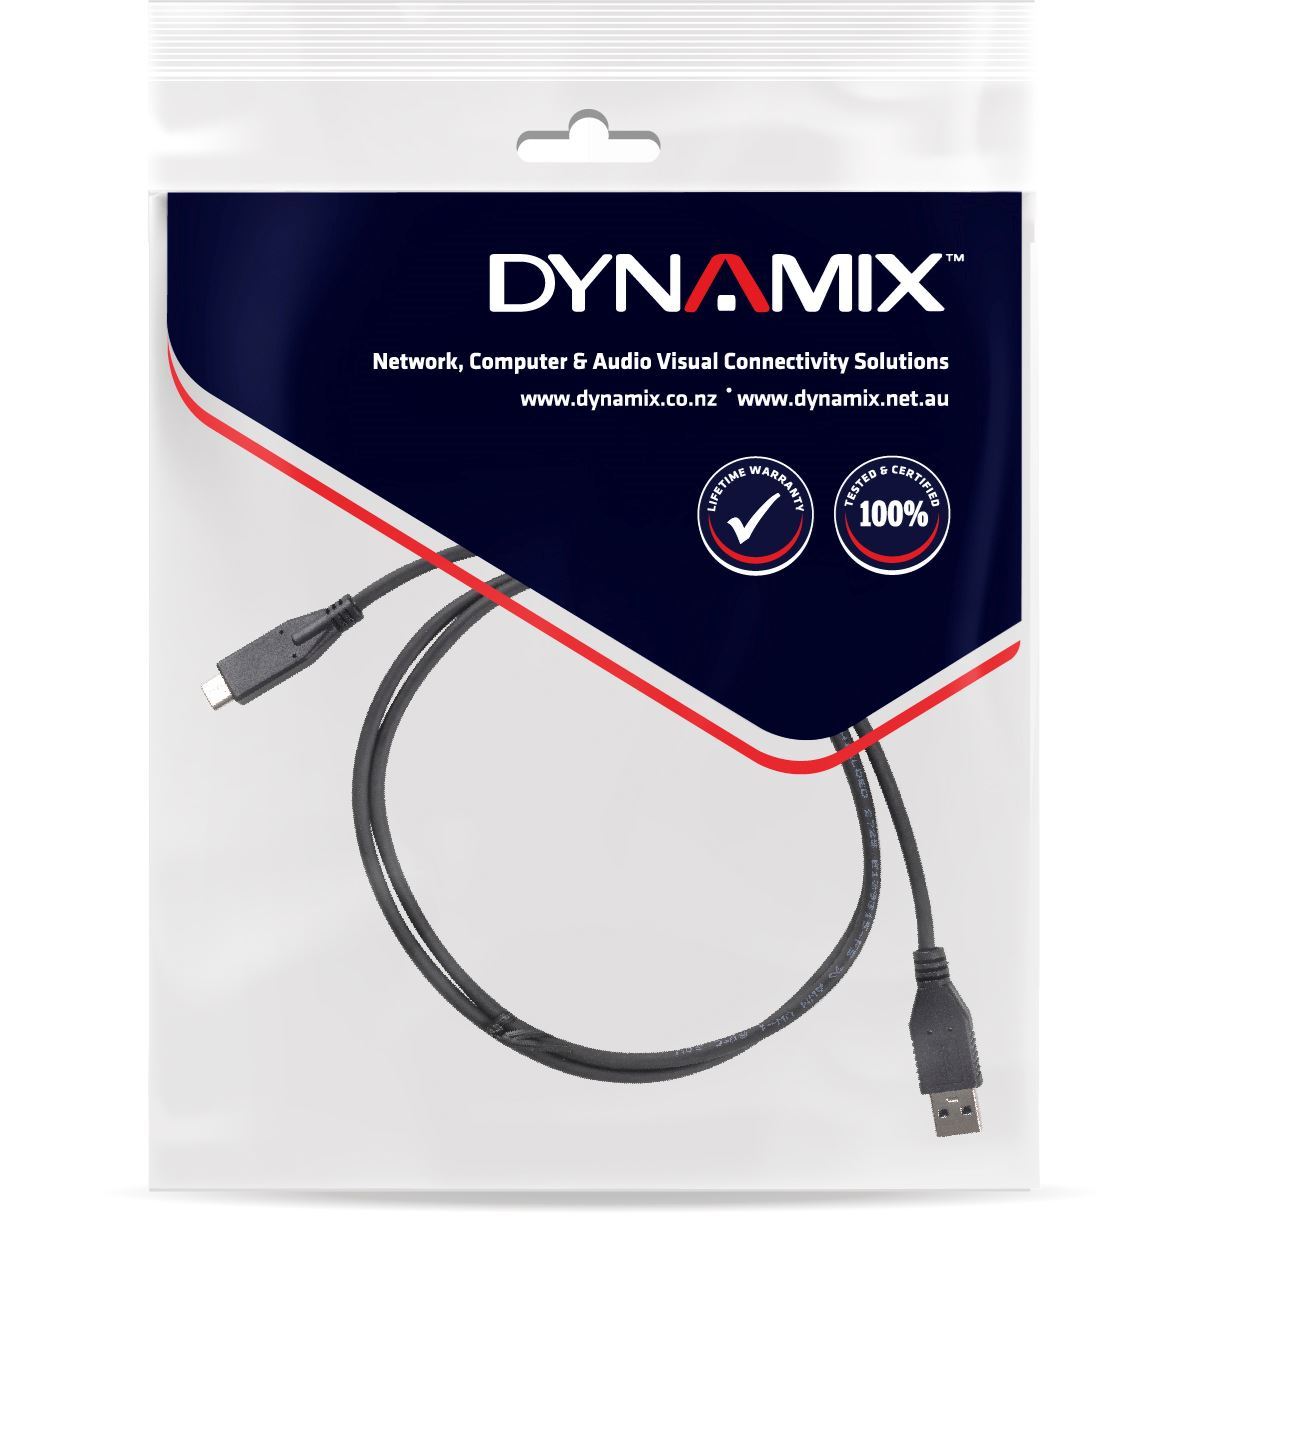 DYNAMIX_1M,_USB_3.1_USB-C_Male_to_USB-A_Male_Cable._Black_Colour._Up_to_10G_Data_Transfer_Speed,_Supports_3A_Current. 1137